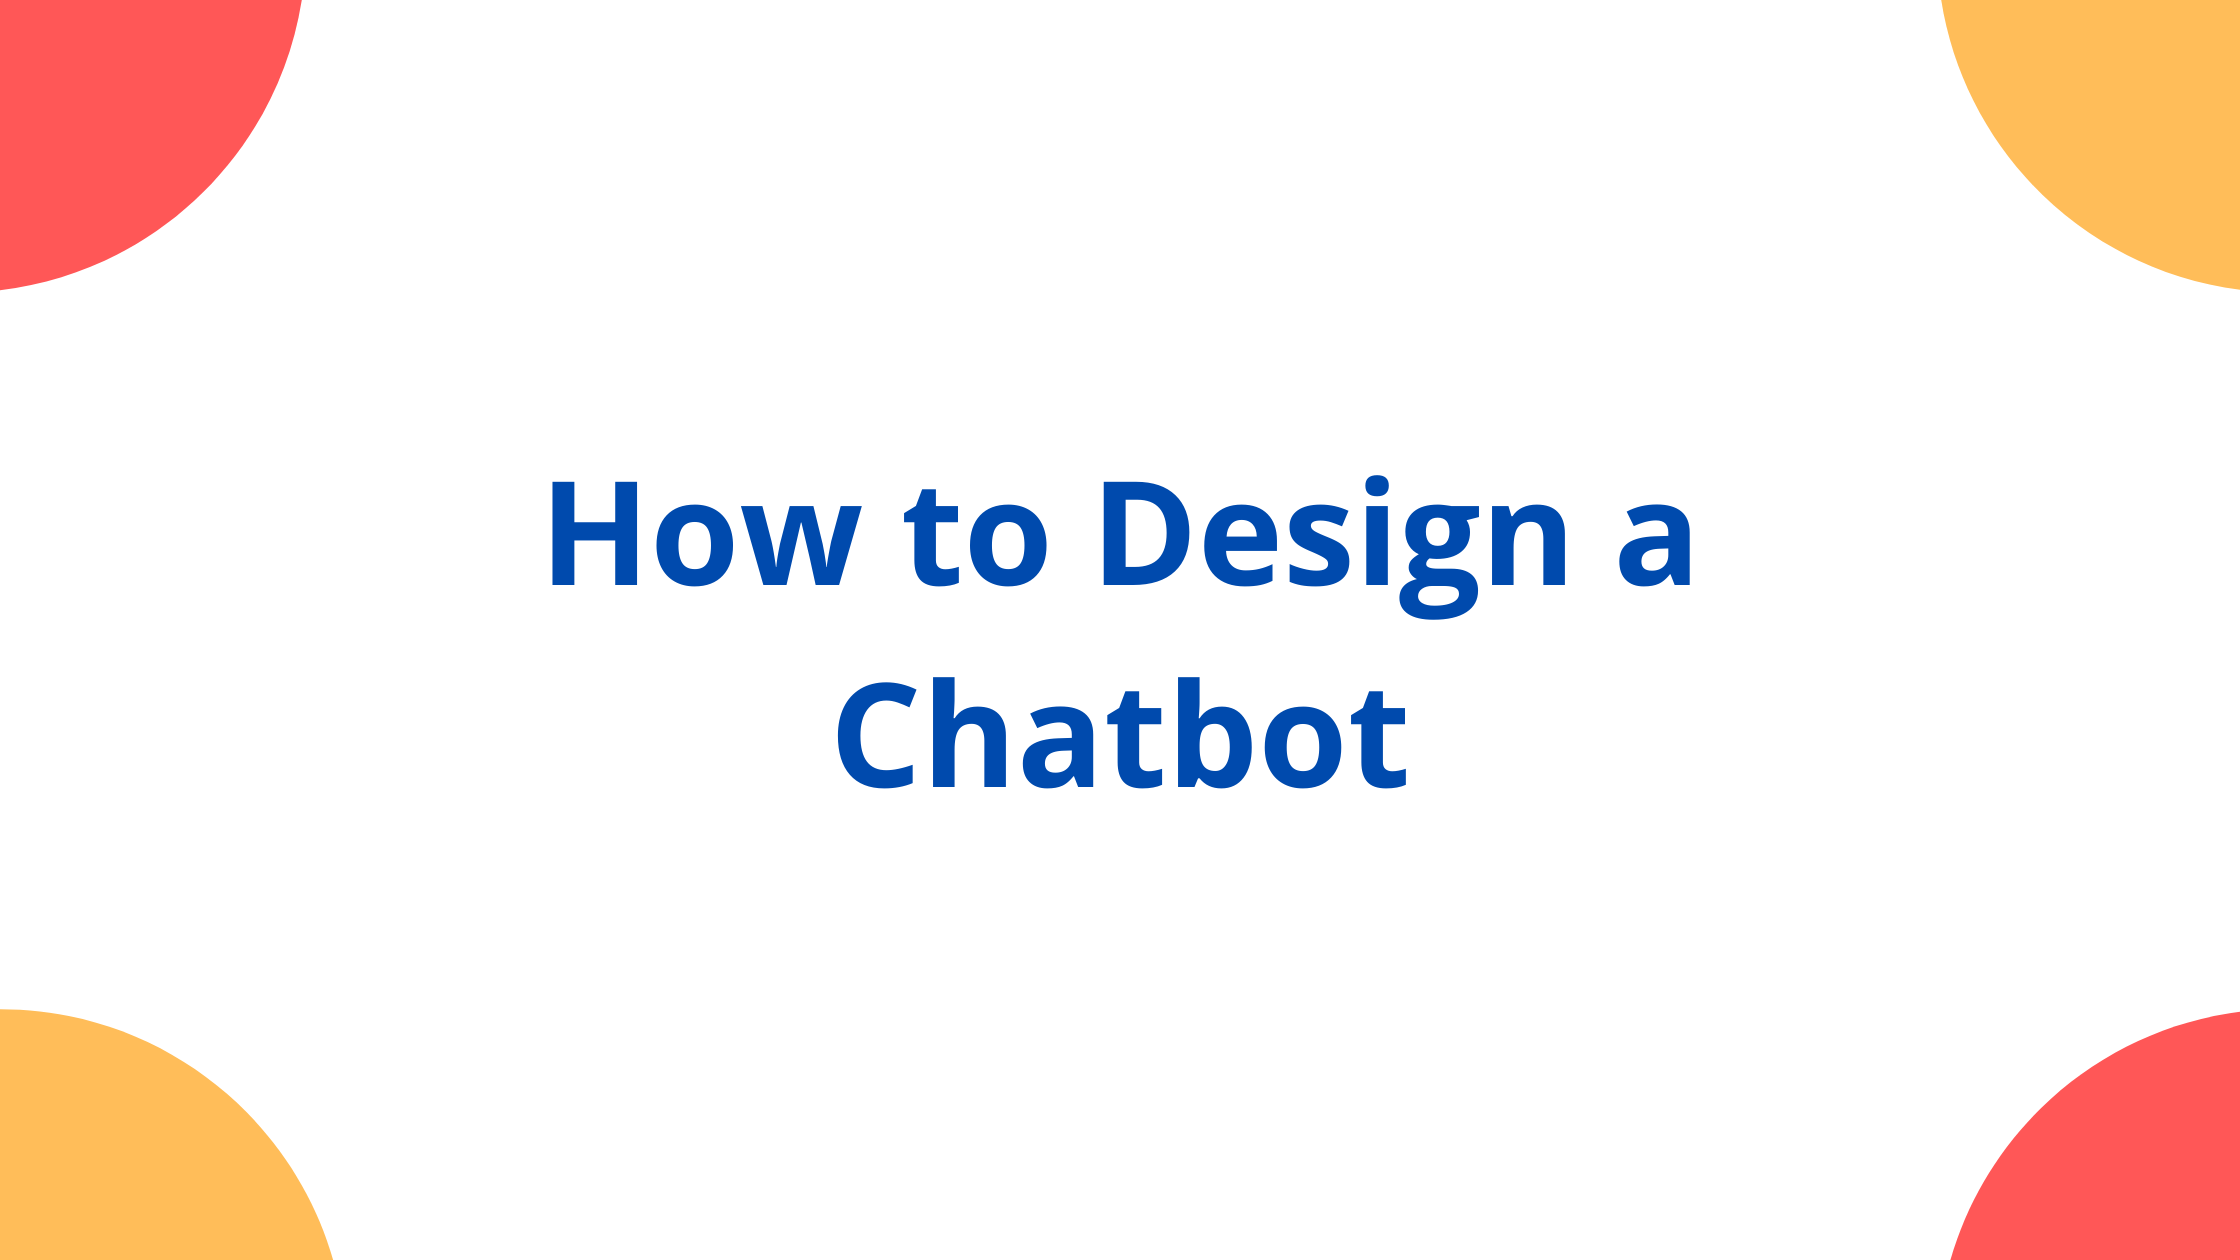 How to Design a Chatbot